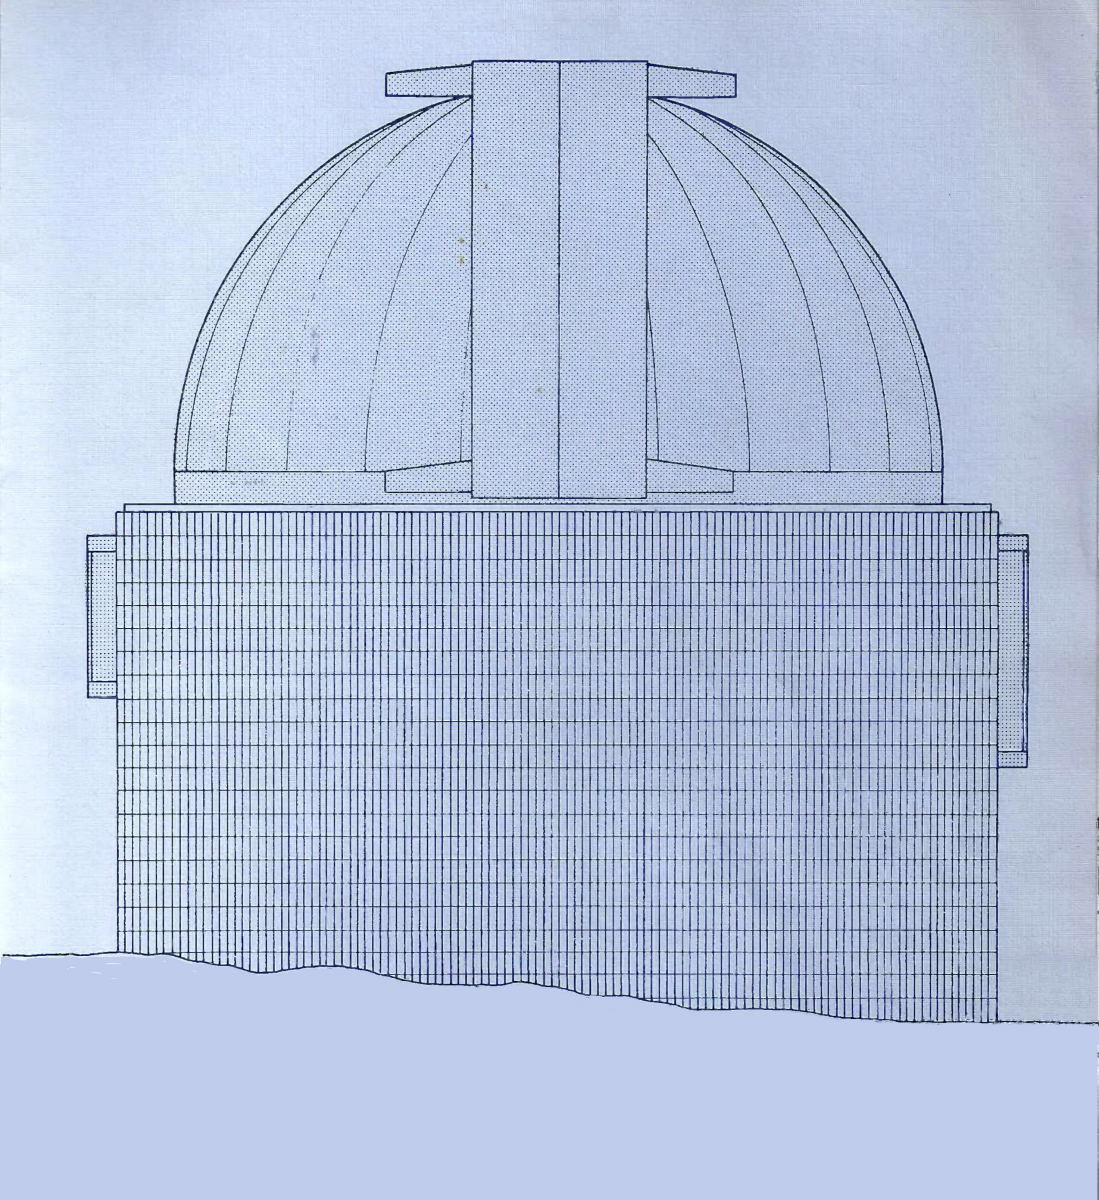 Z-Dome Rendering. Exterior viewed from the east.